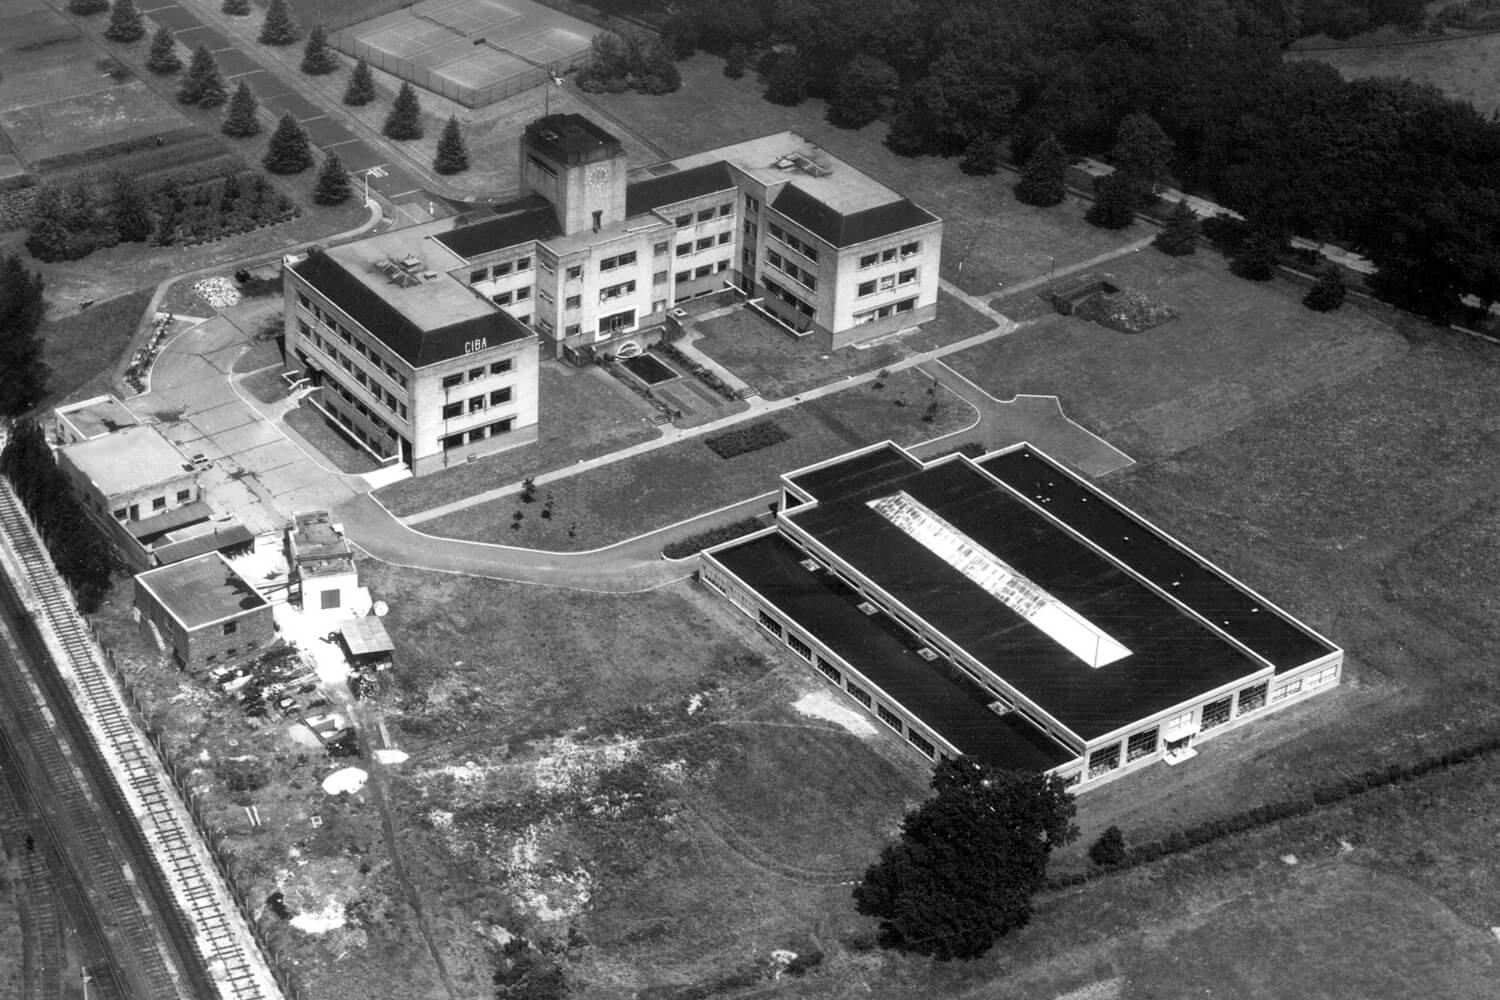 Aerial image of the site looking north taken in 1954